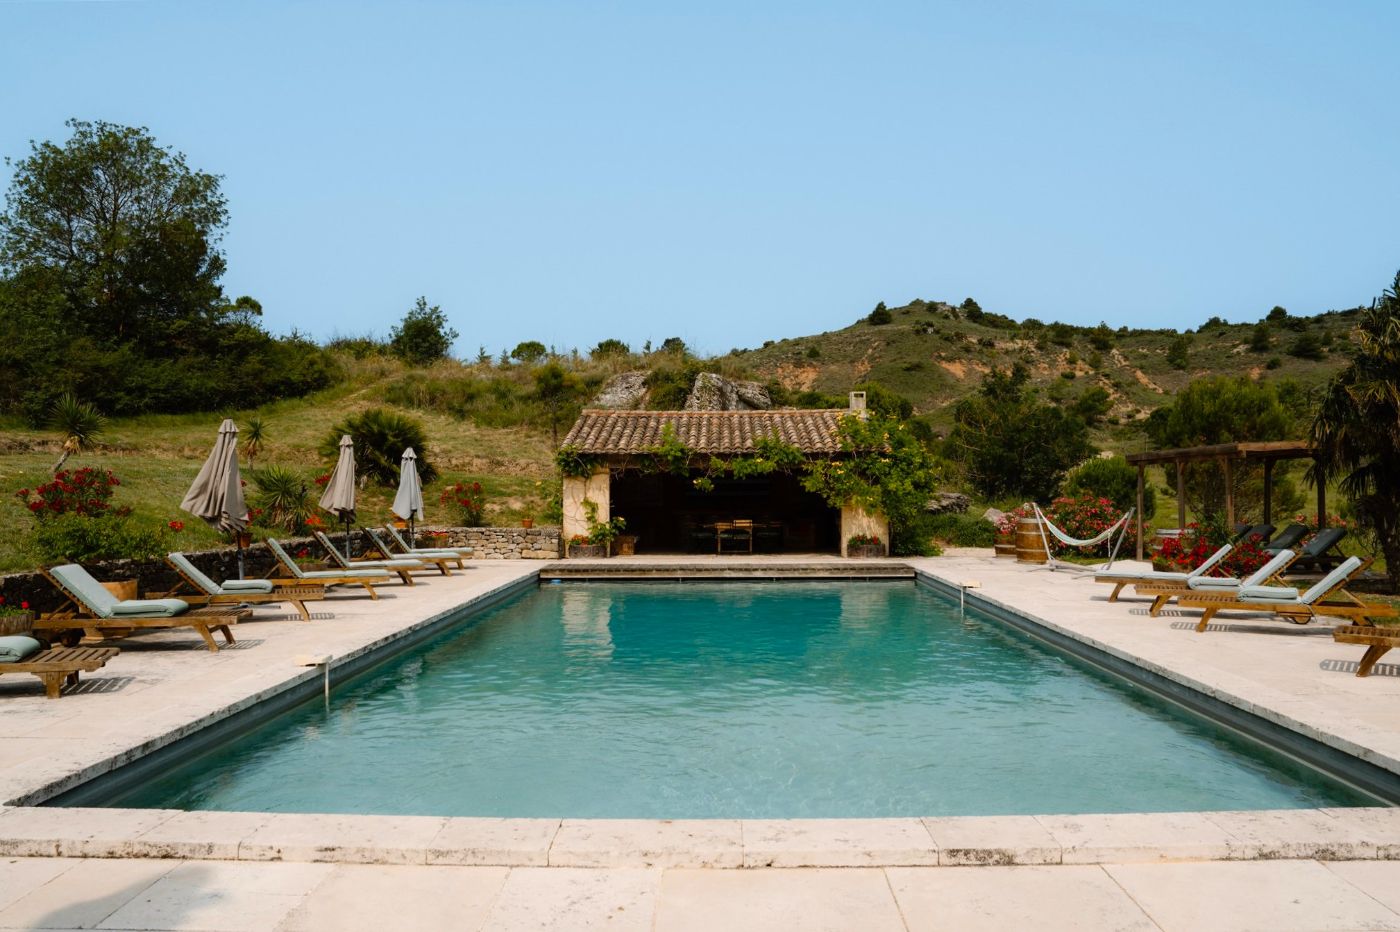 Swimming Pool at Domaine de Corbieres in South West France